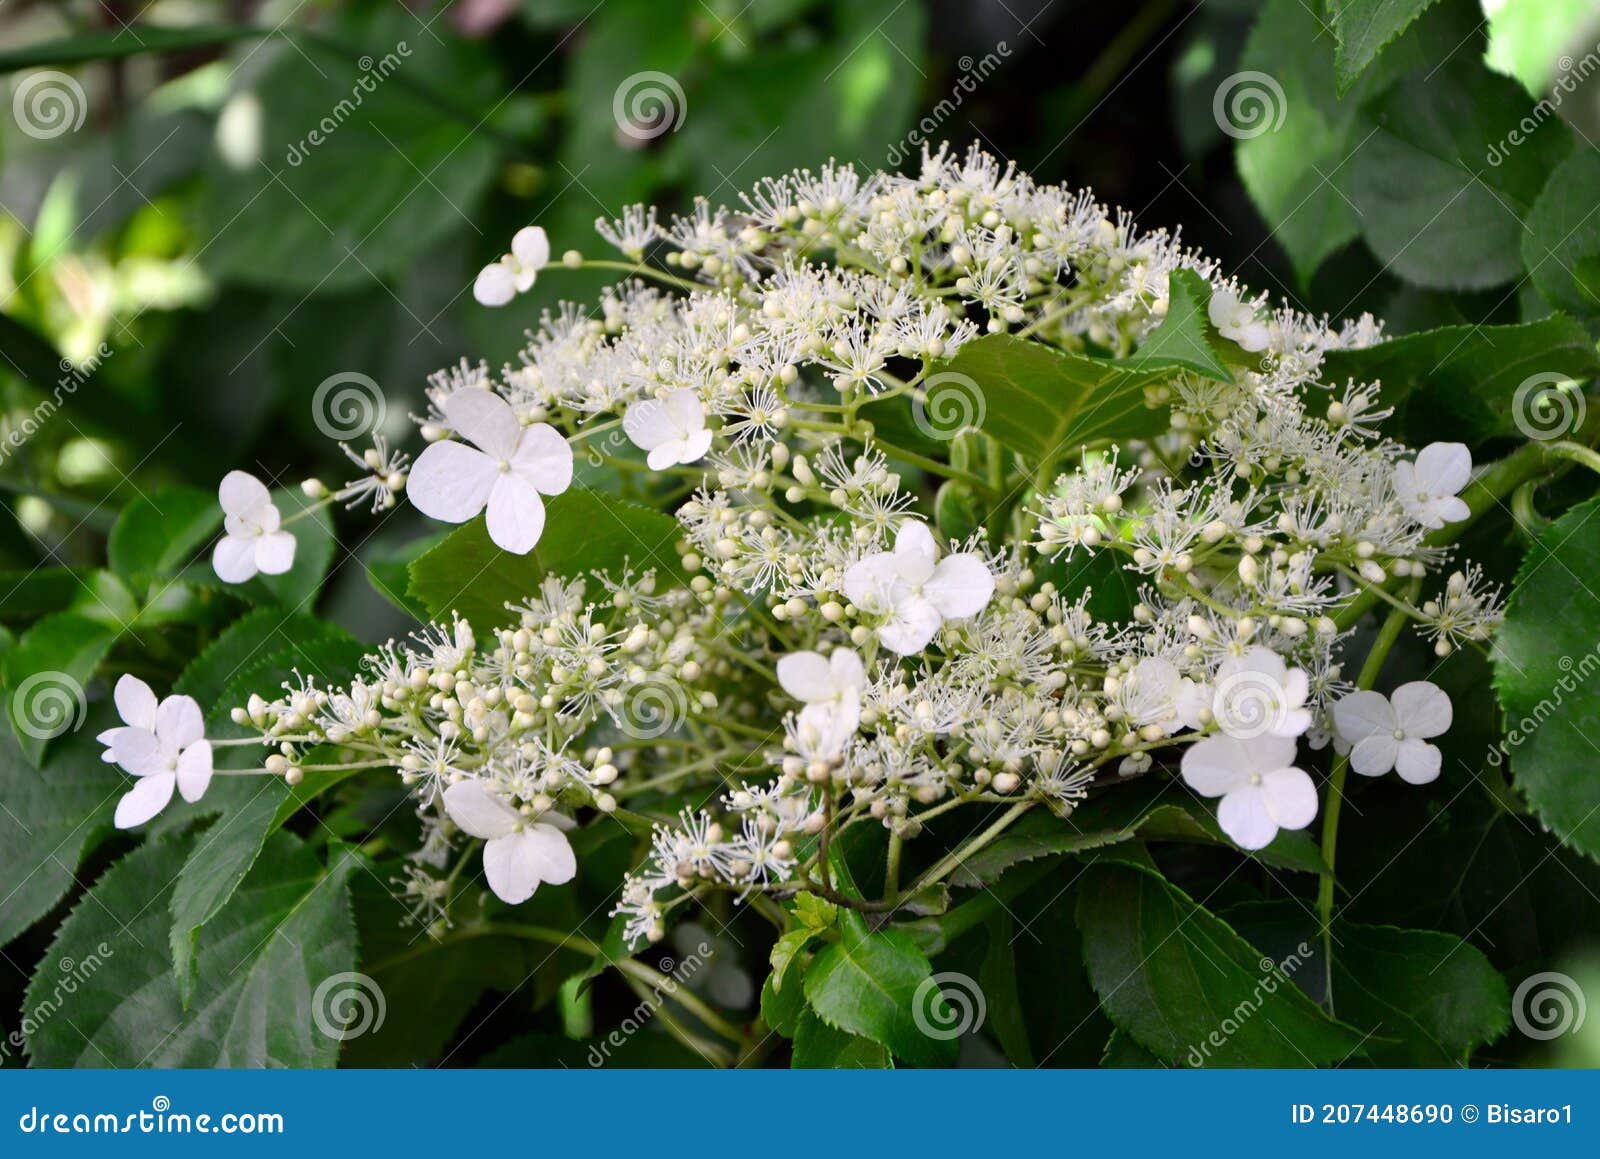 Flowers Of Climbing Hydrangea In The Garden Close Up Stock Photo Image Of Petioles Branch 207448690